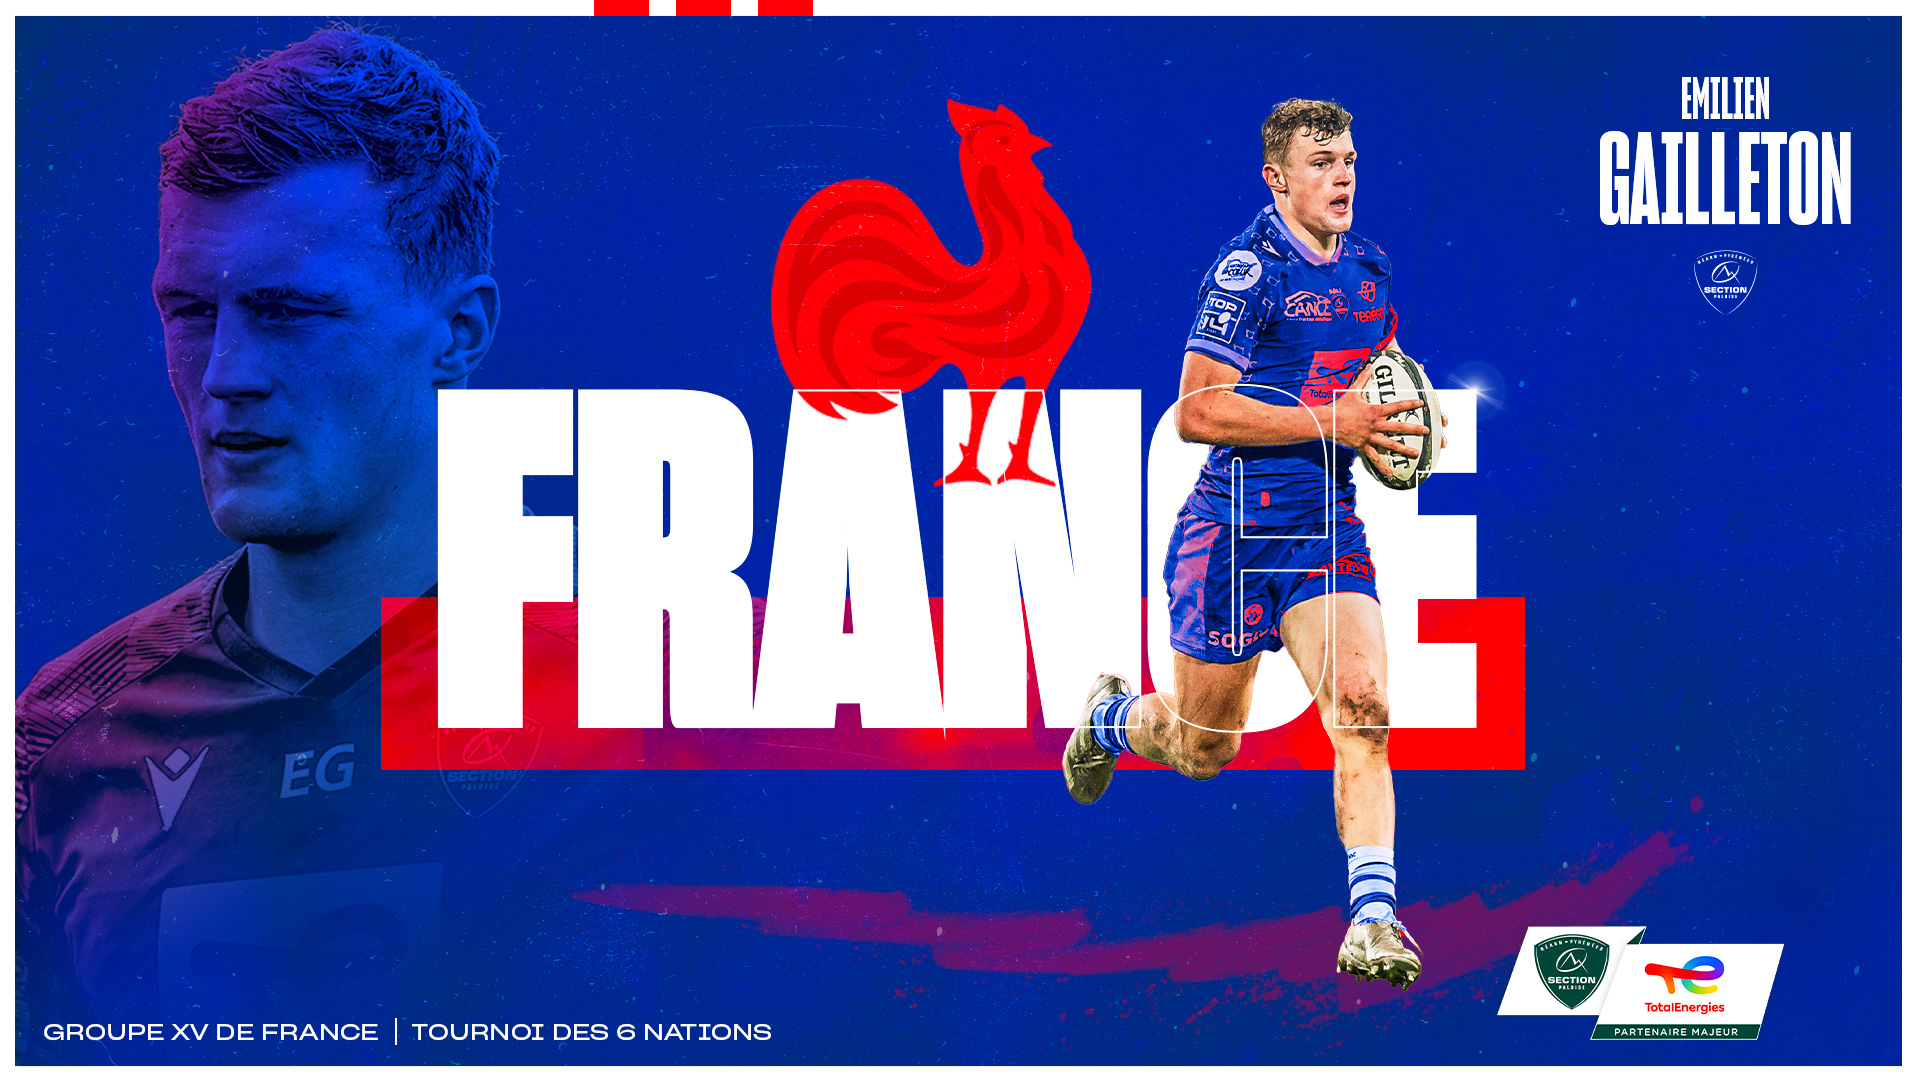 FRANCE SELECTION 1920x1080 2